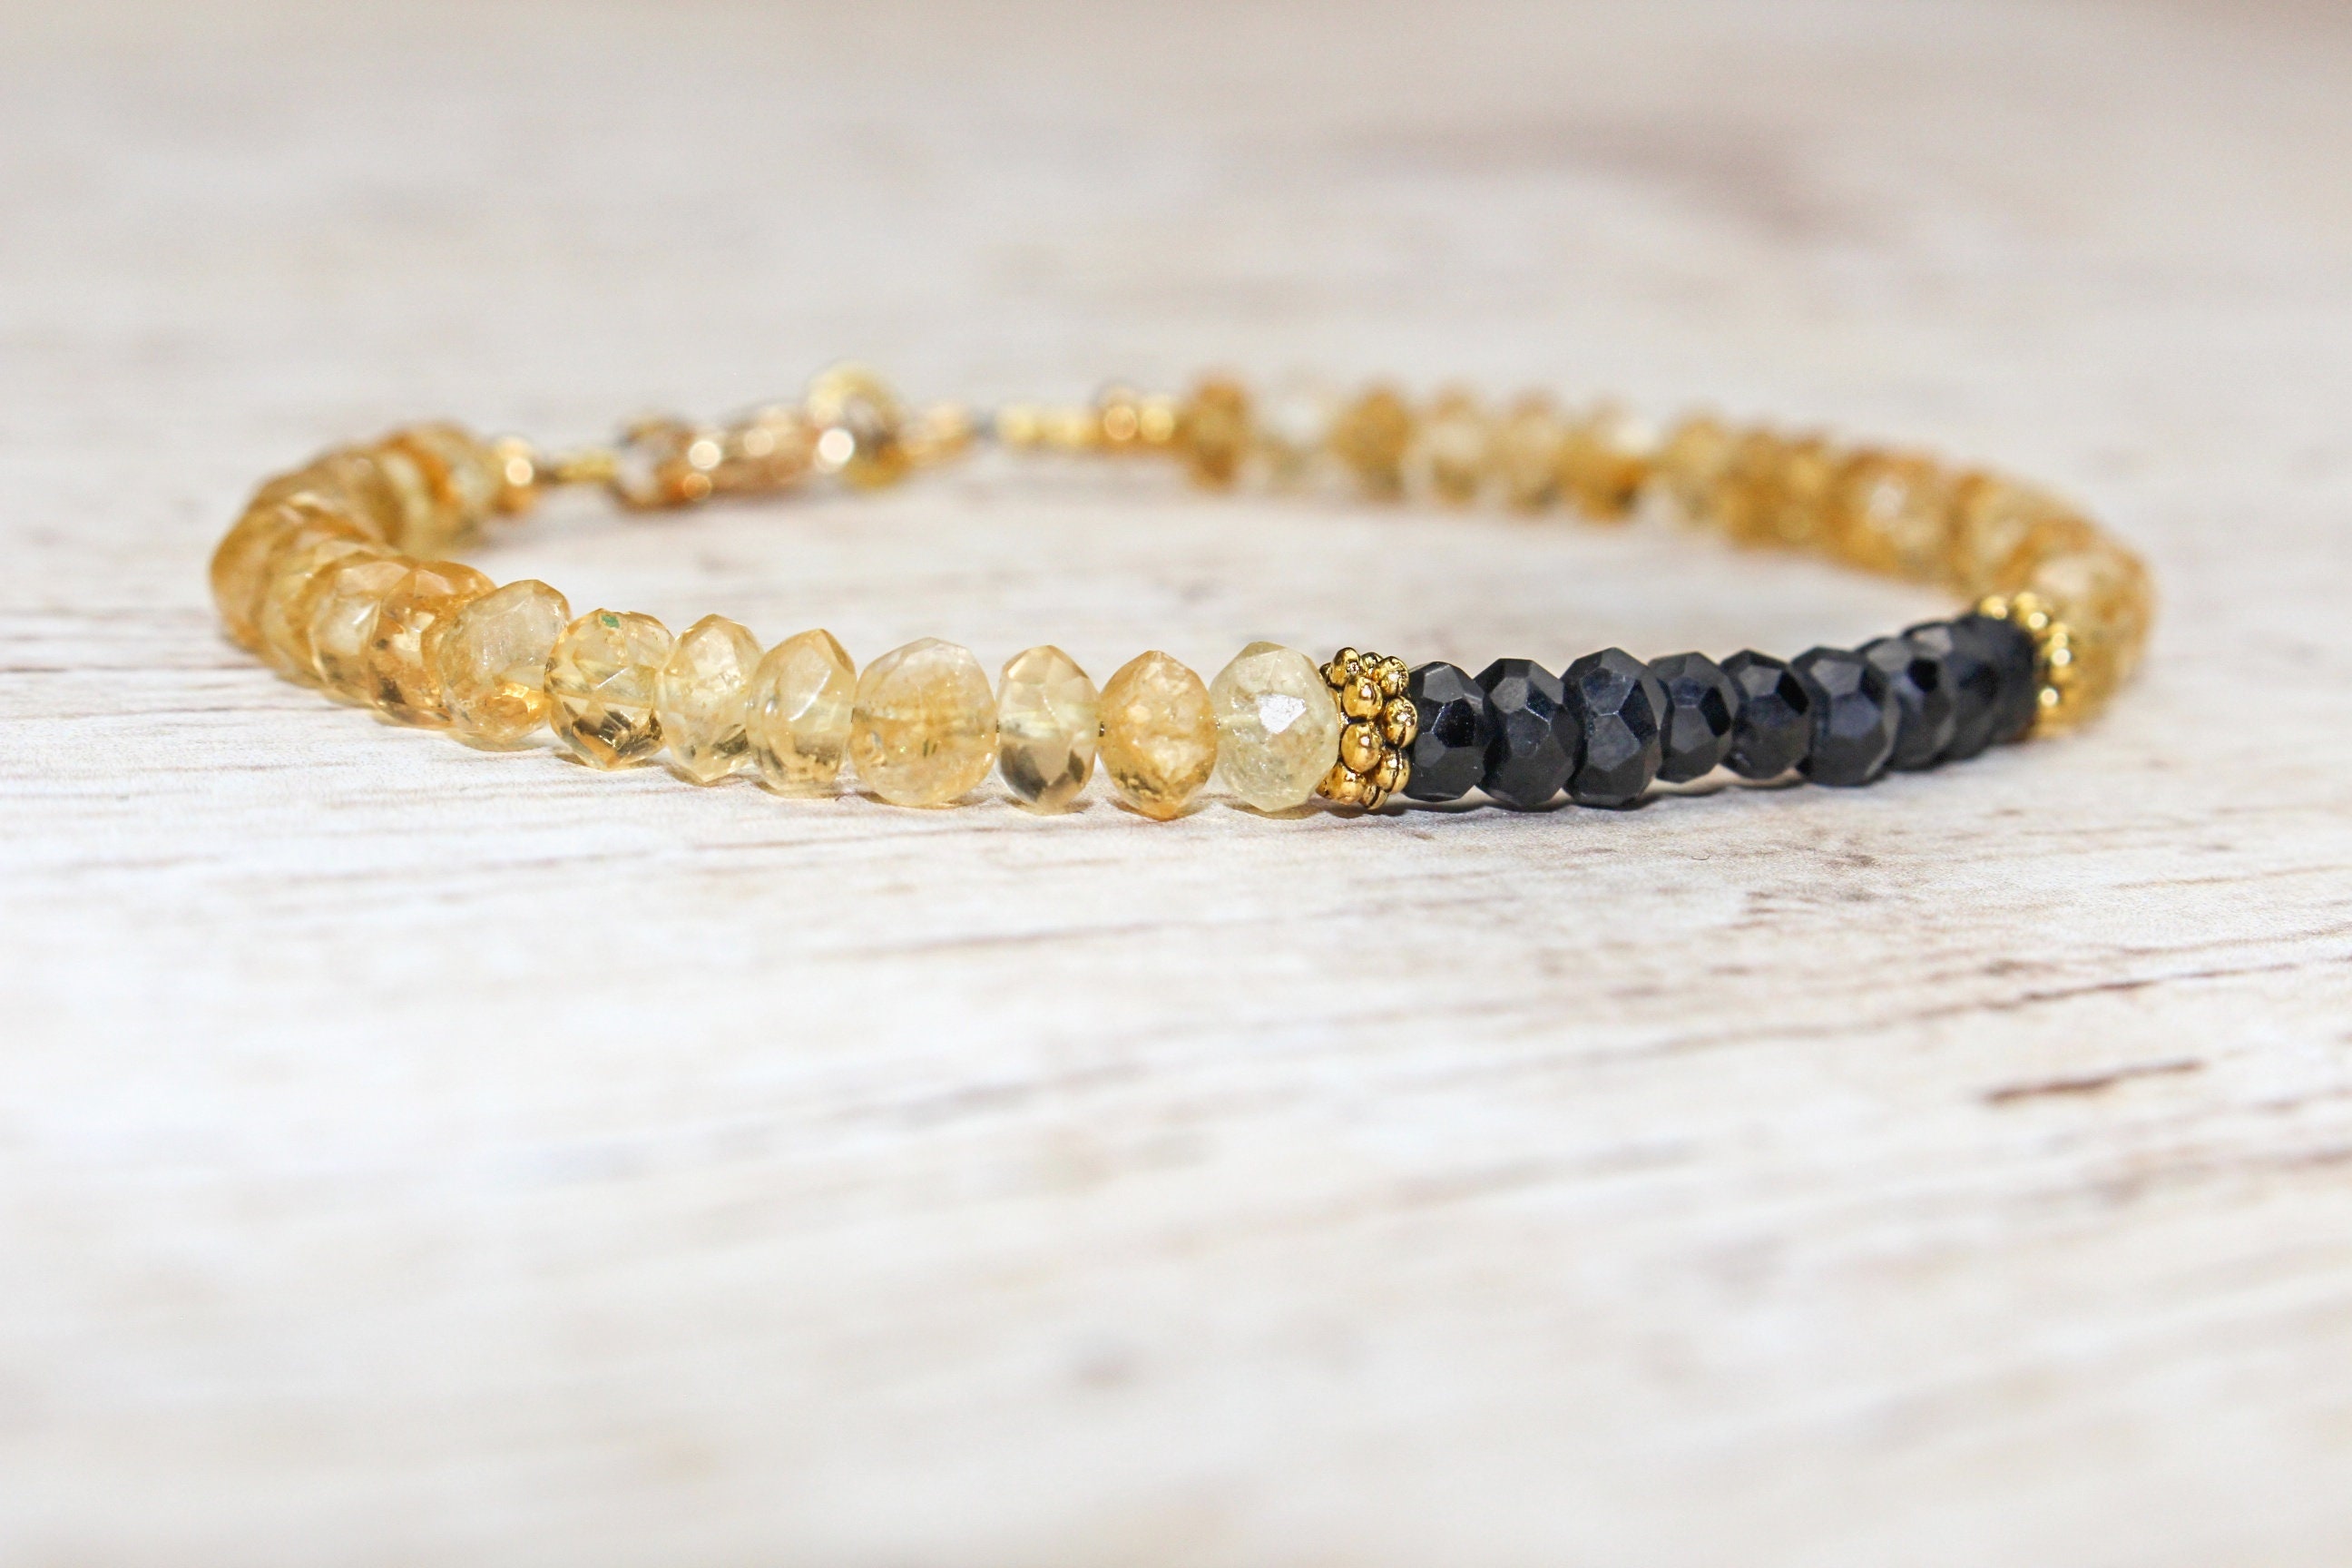 Faceted CITRINE and BLACK SPINEL Bracelet Joy and Protection - Etsy